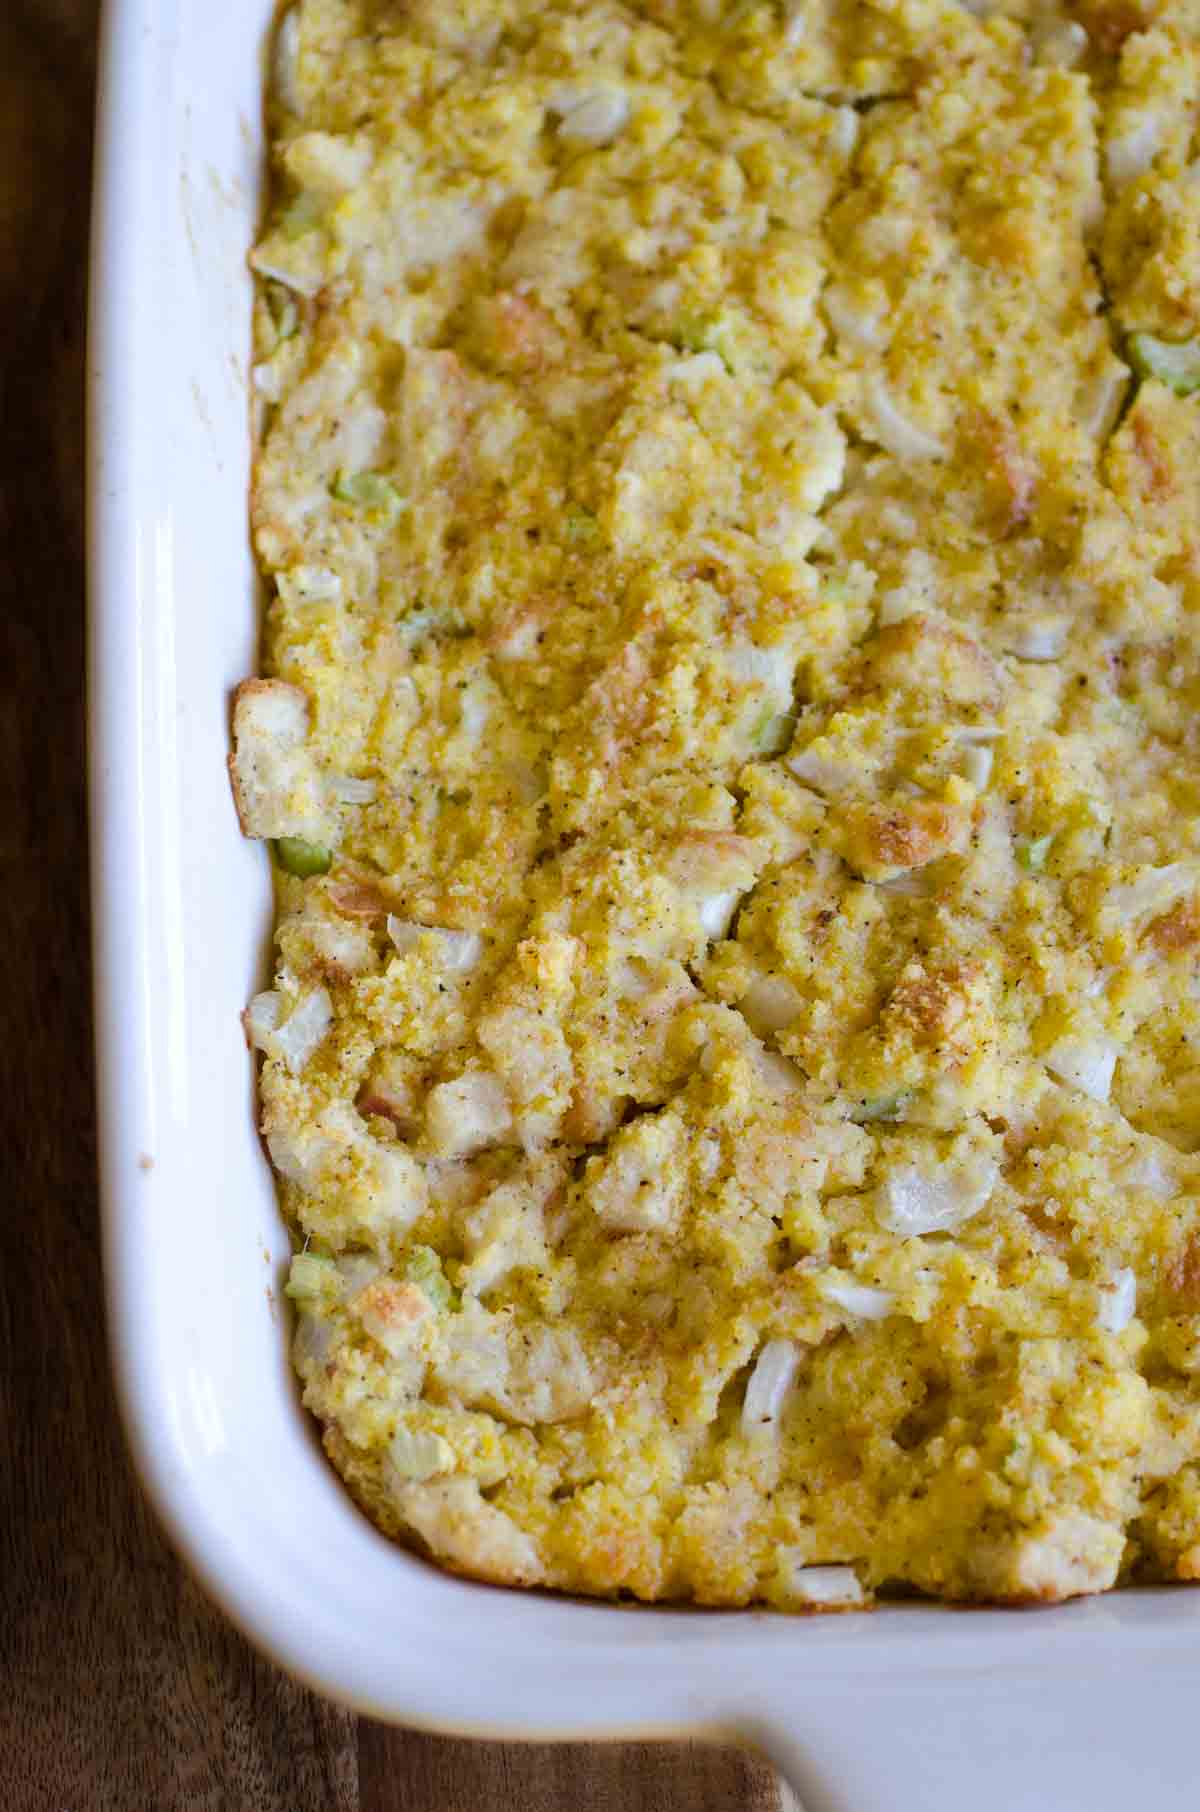 Easy Cornbread Dressing - Use Jiffy or homemade, your choice!